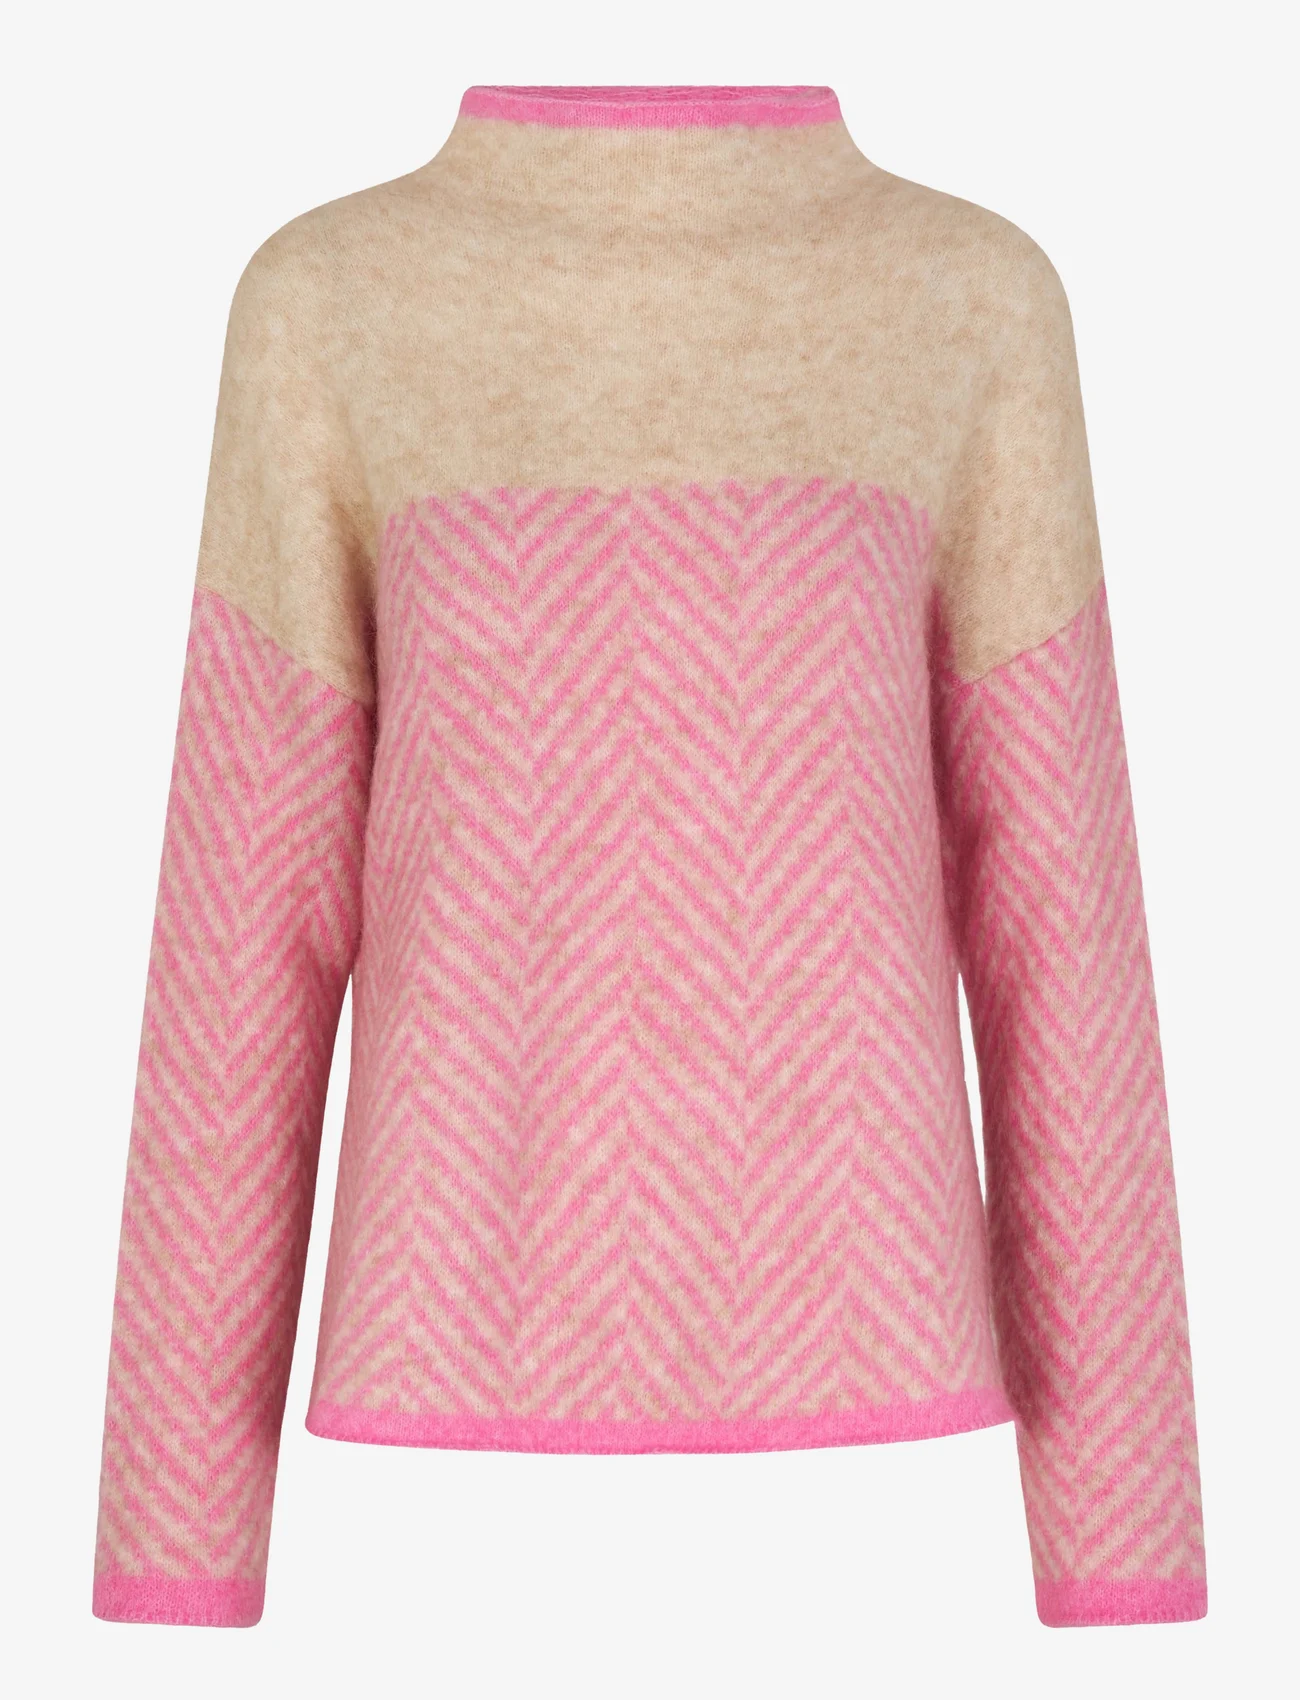 Second Female - Herrin Knit Stripe T-Neck - jumpers - begonia pink - 0